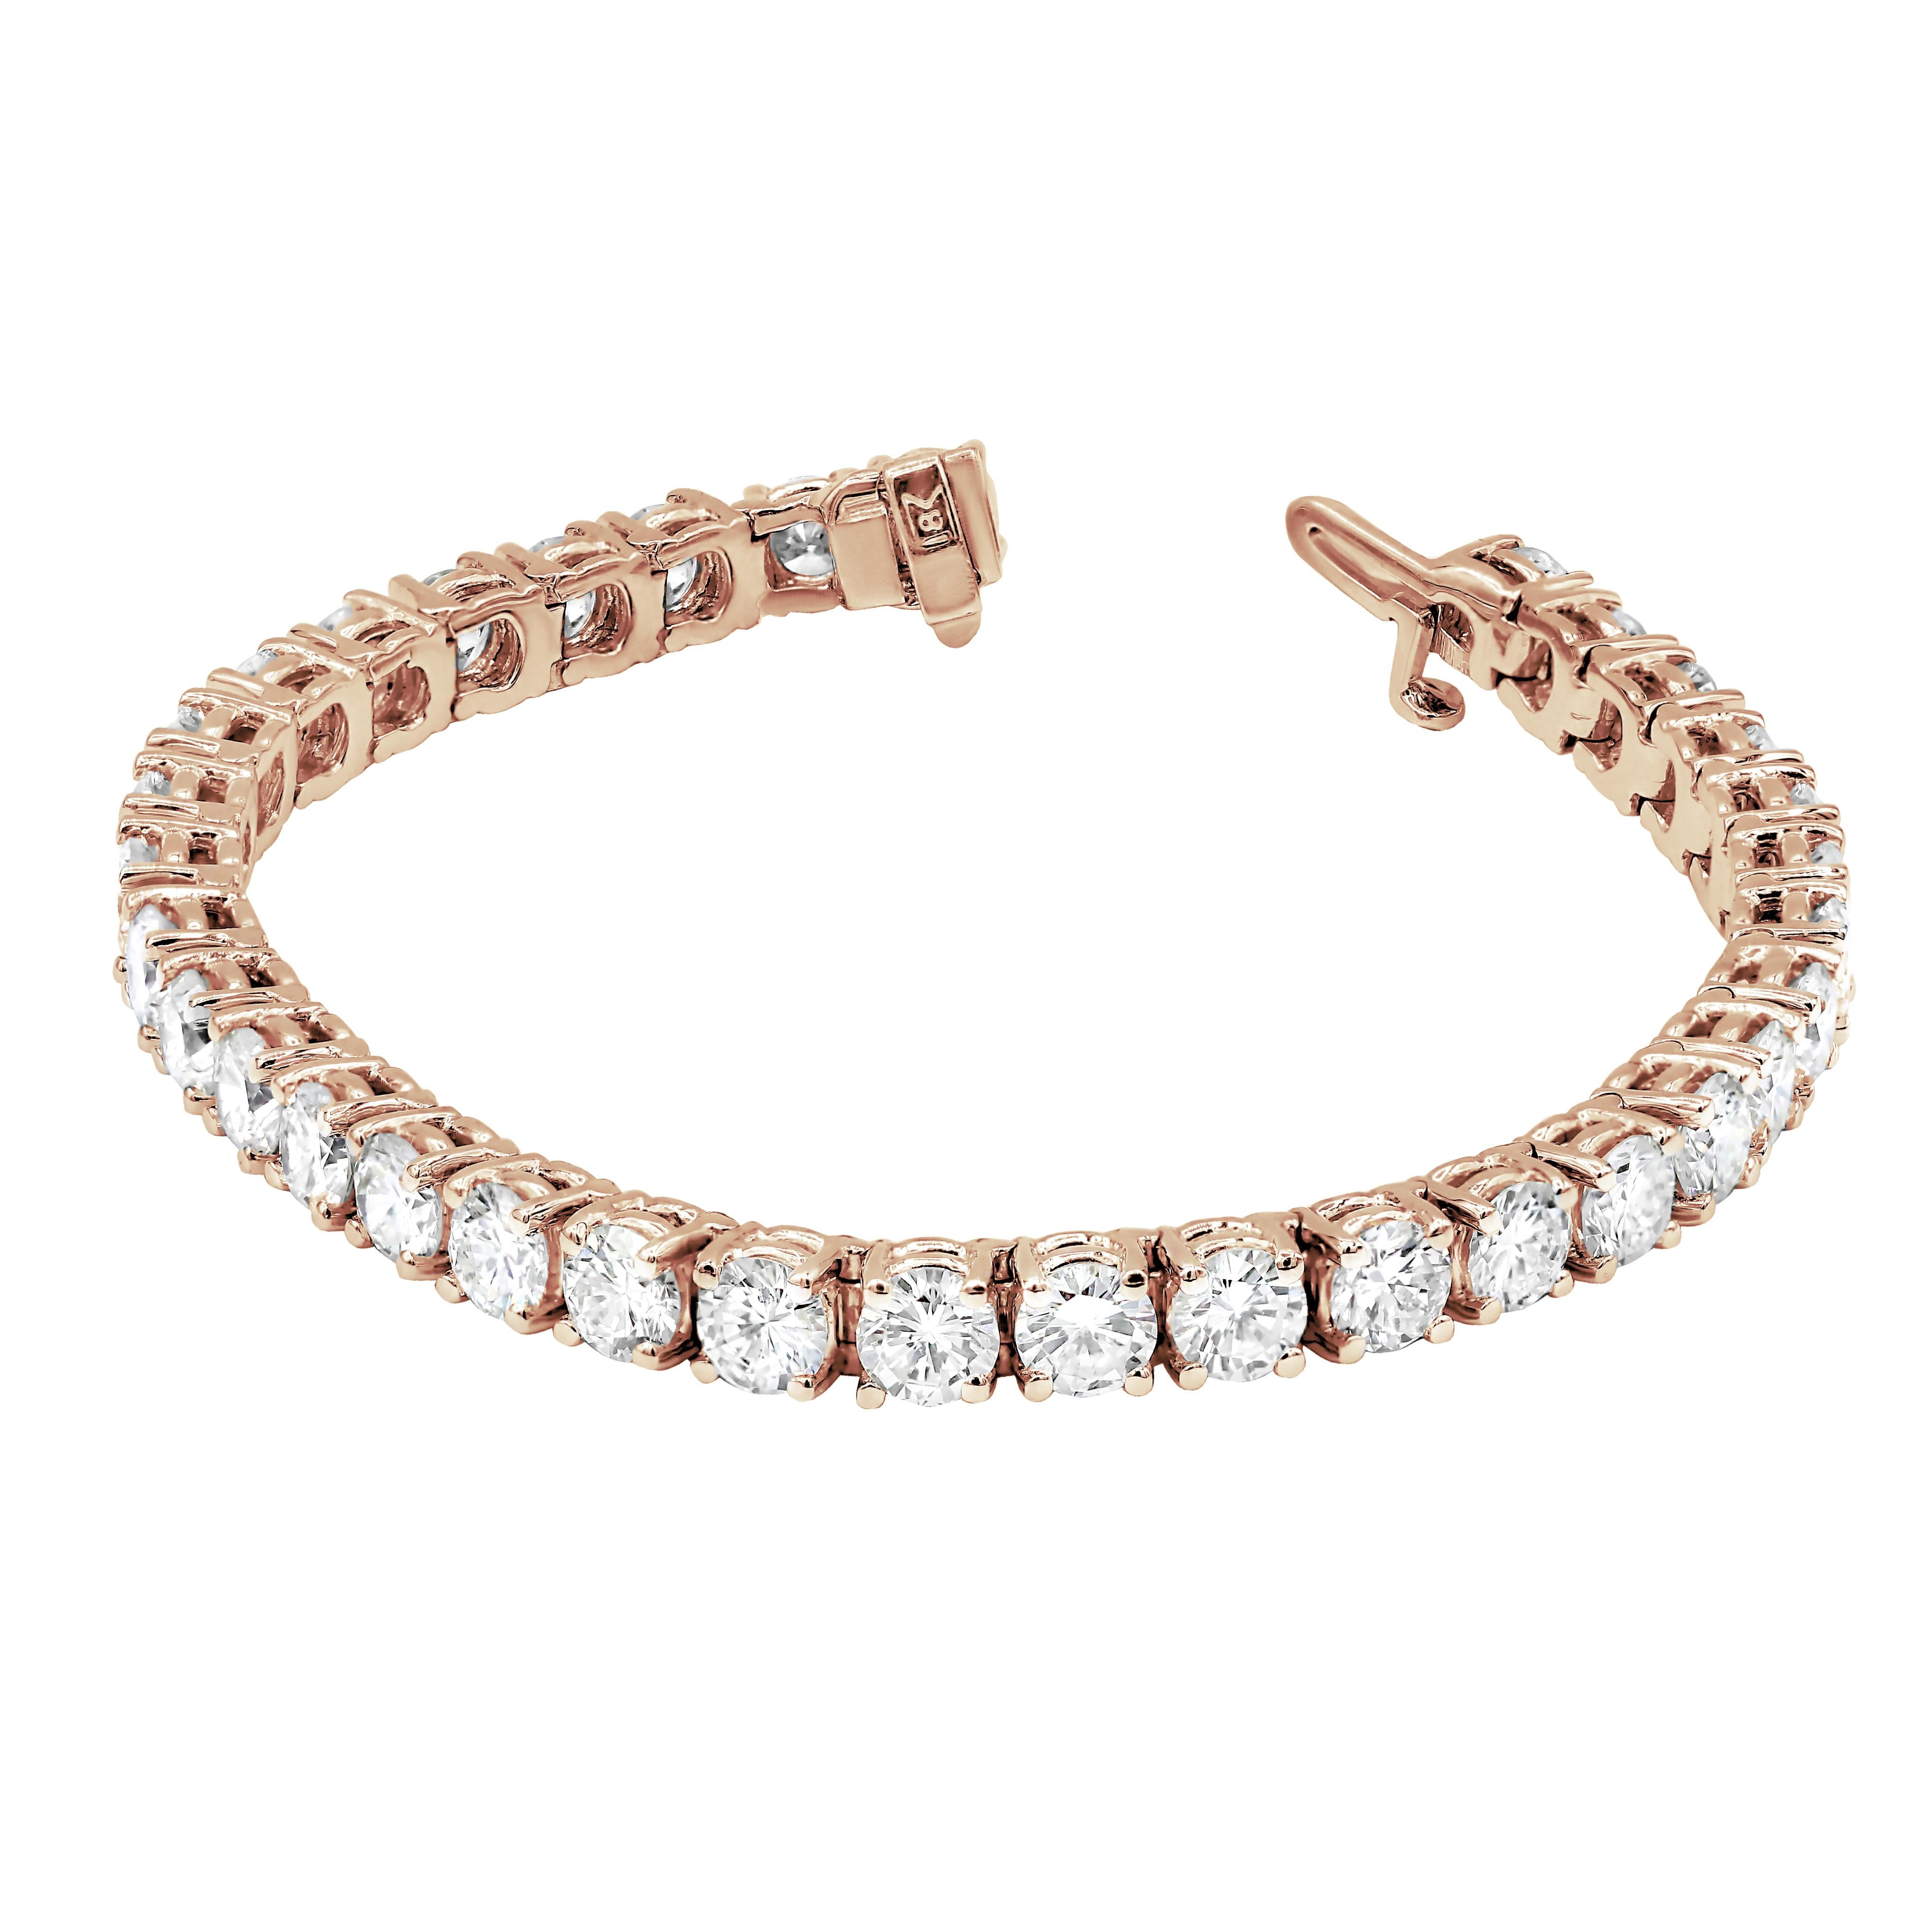 Custom 14kt rose gold tennis bracelet with 4.59 cts round diamonds set in a 4 prong setting 55 stones 0.08 each GH color SI clarity.  Excellent Cut.

